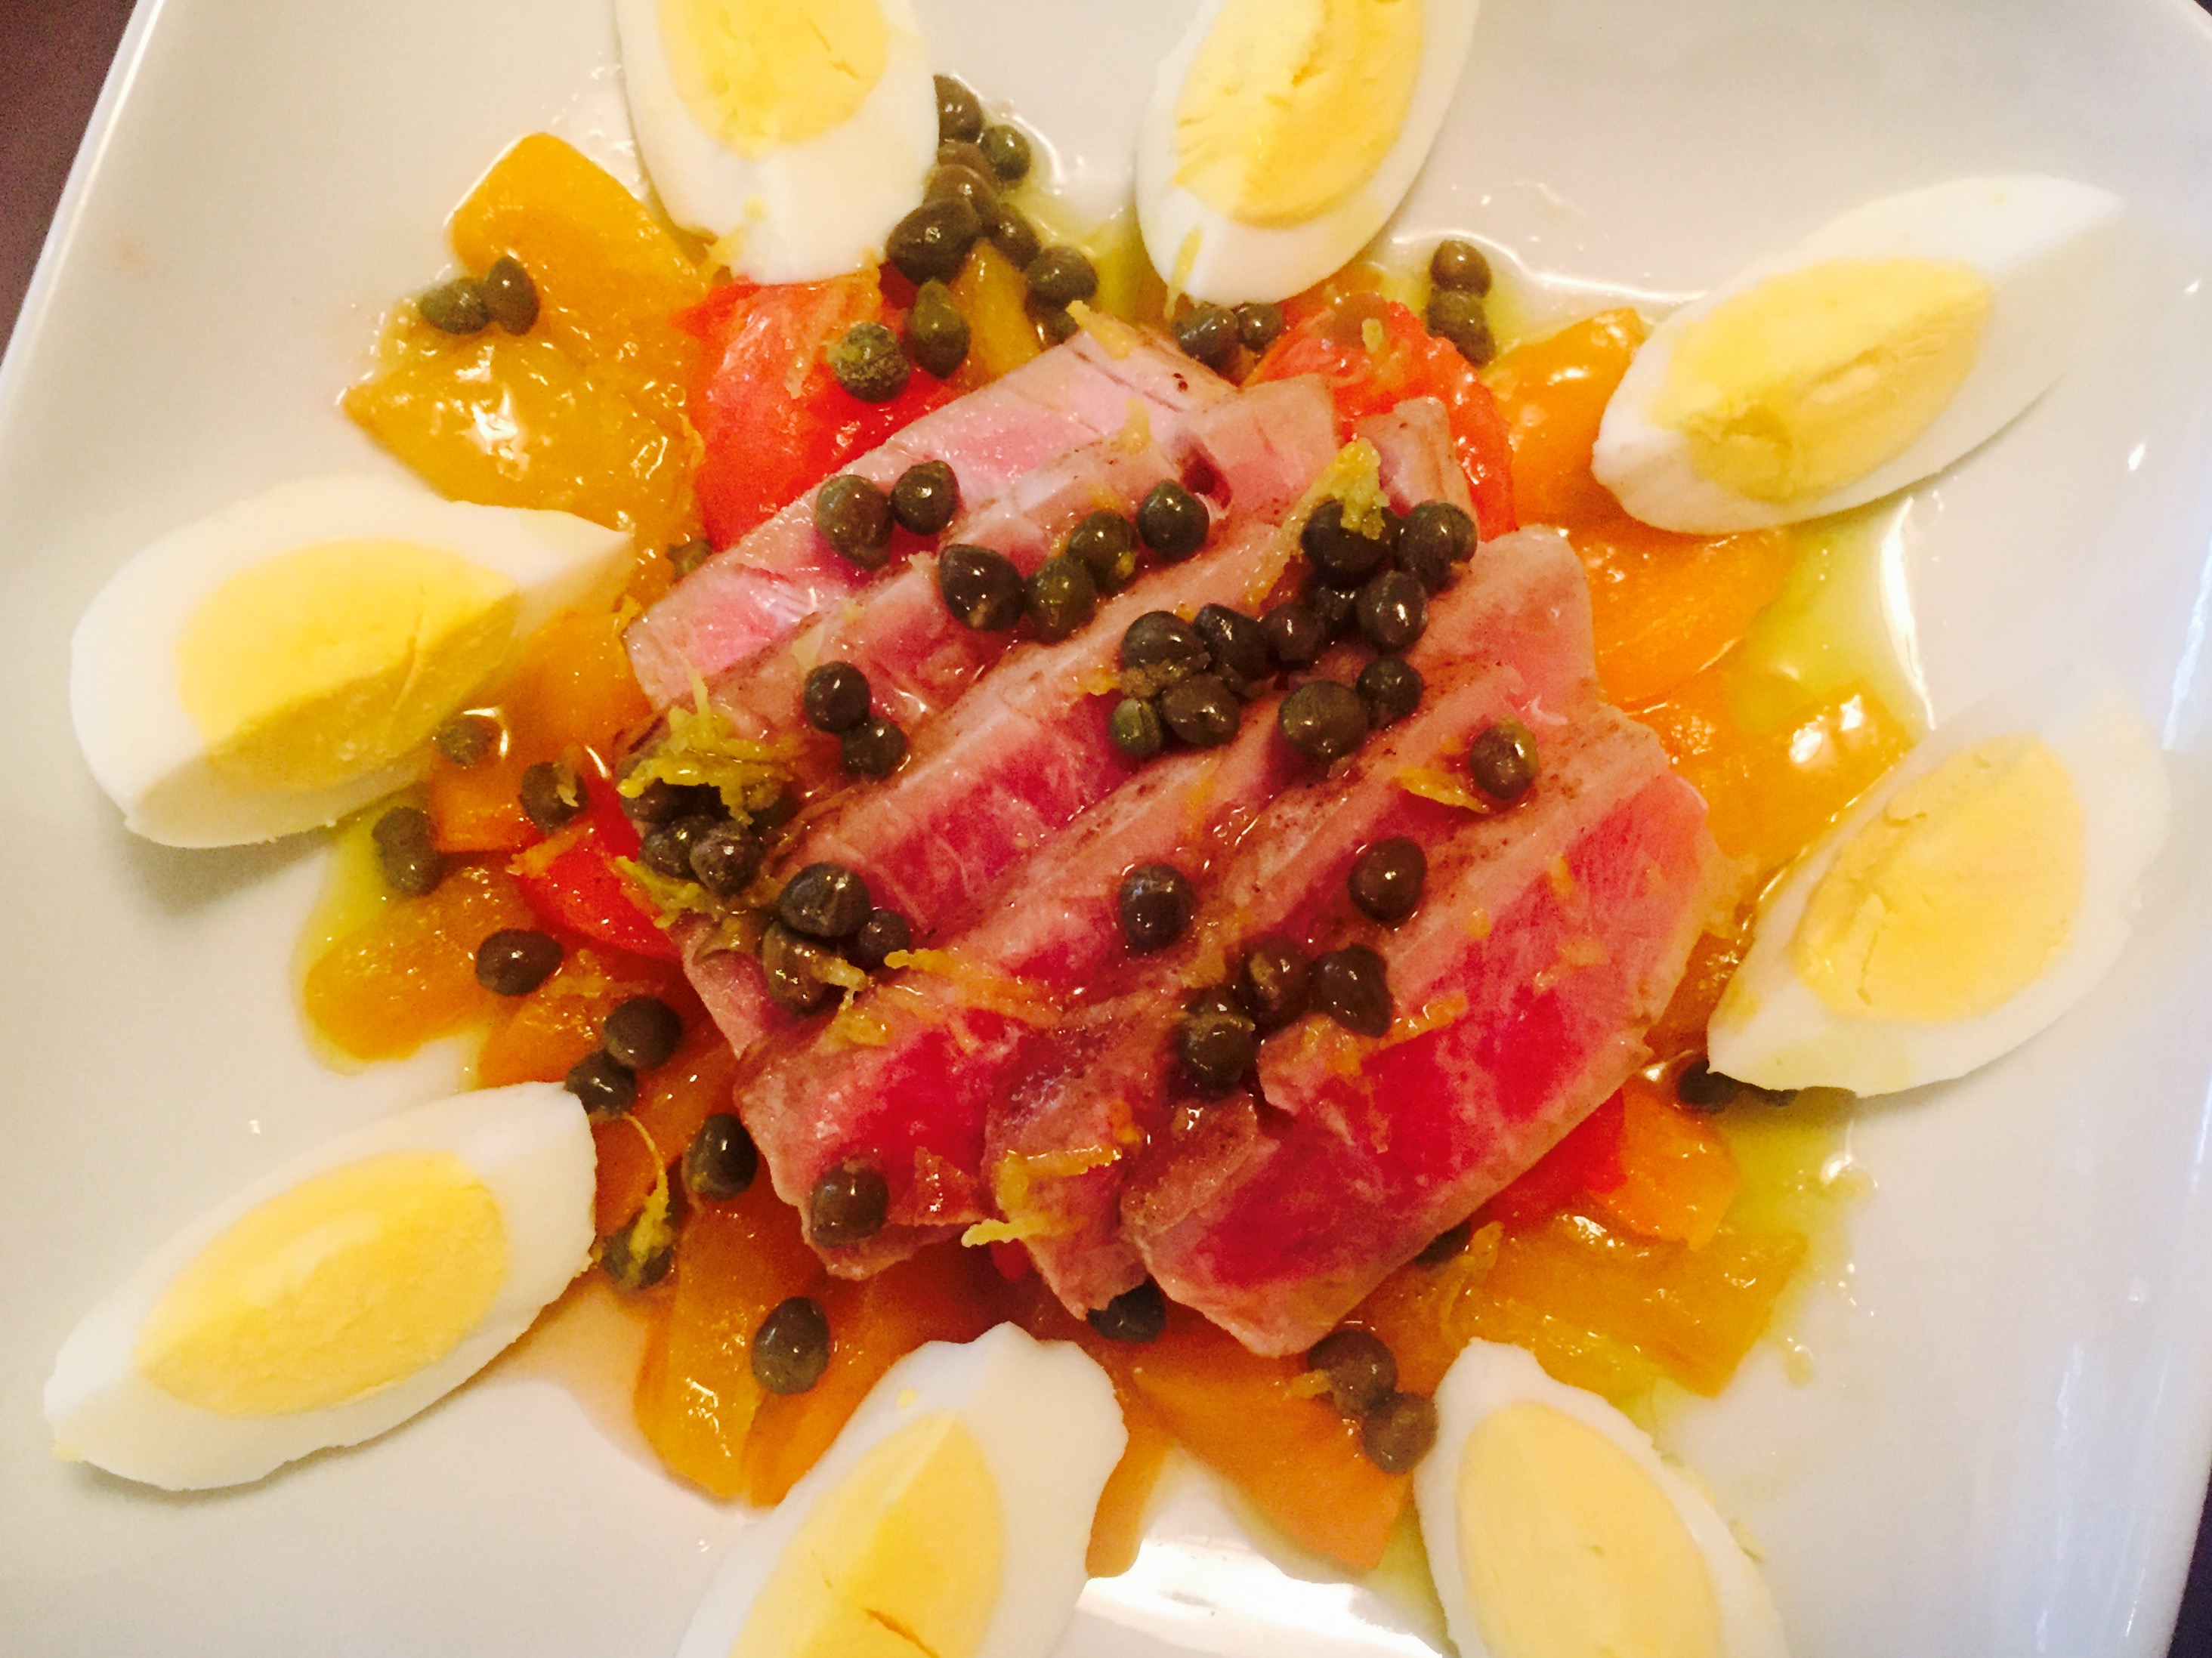 Tunisian Mechouia salad with steered tuna, roasted peppers, broiled tomatoes and a zesty lemon & caper vinaigrette